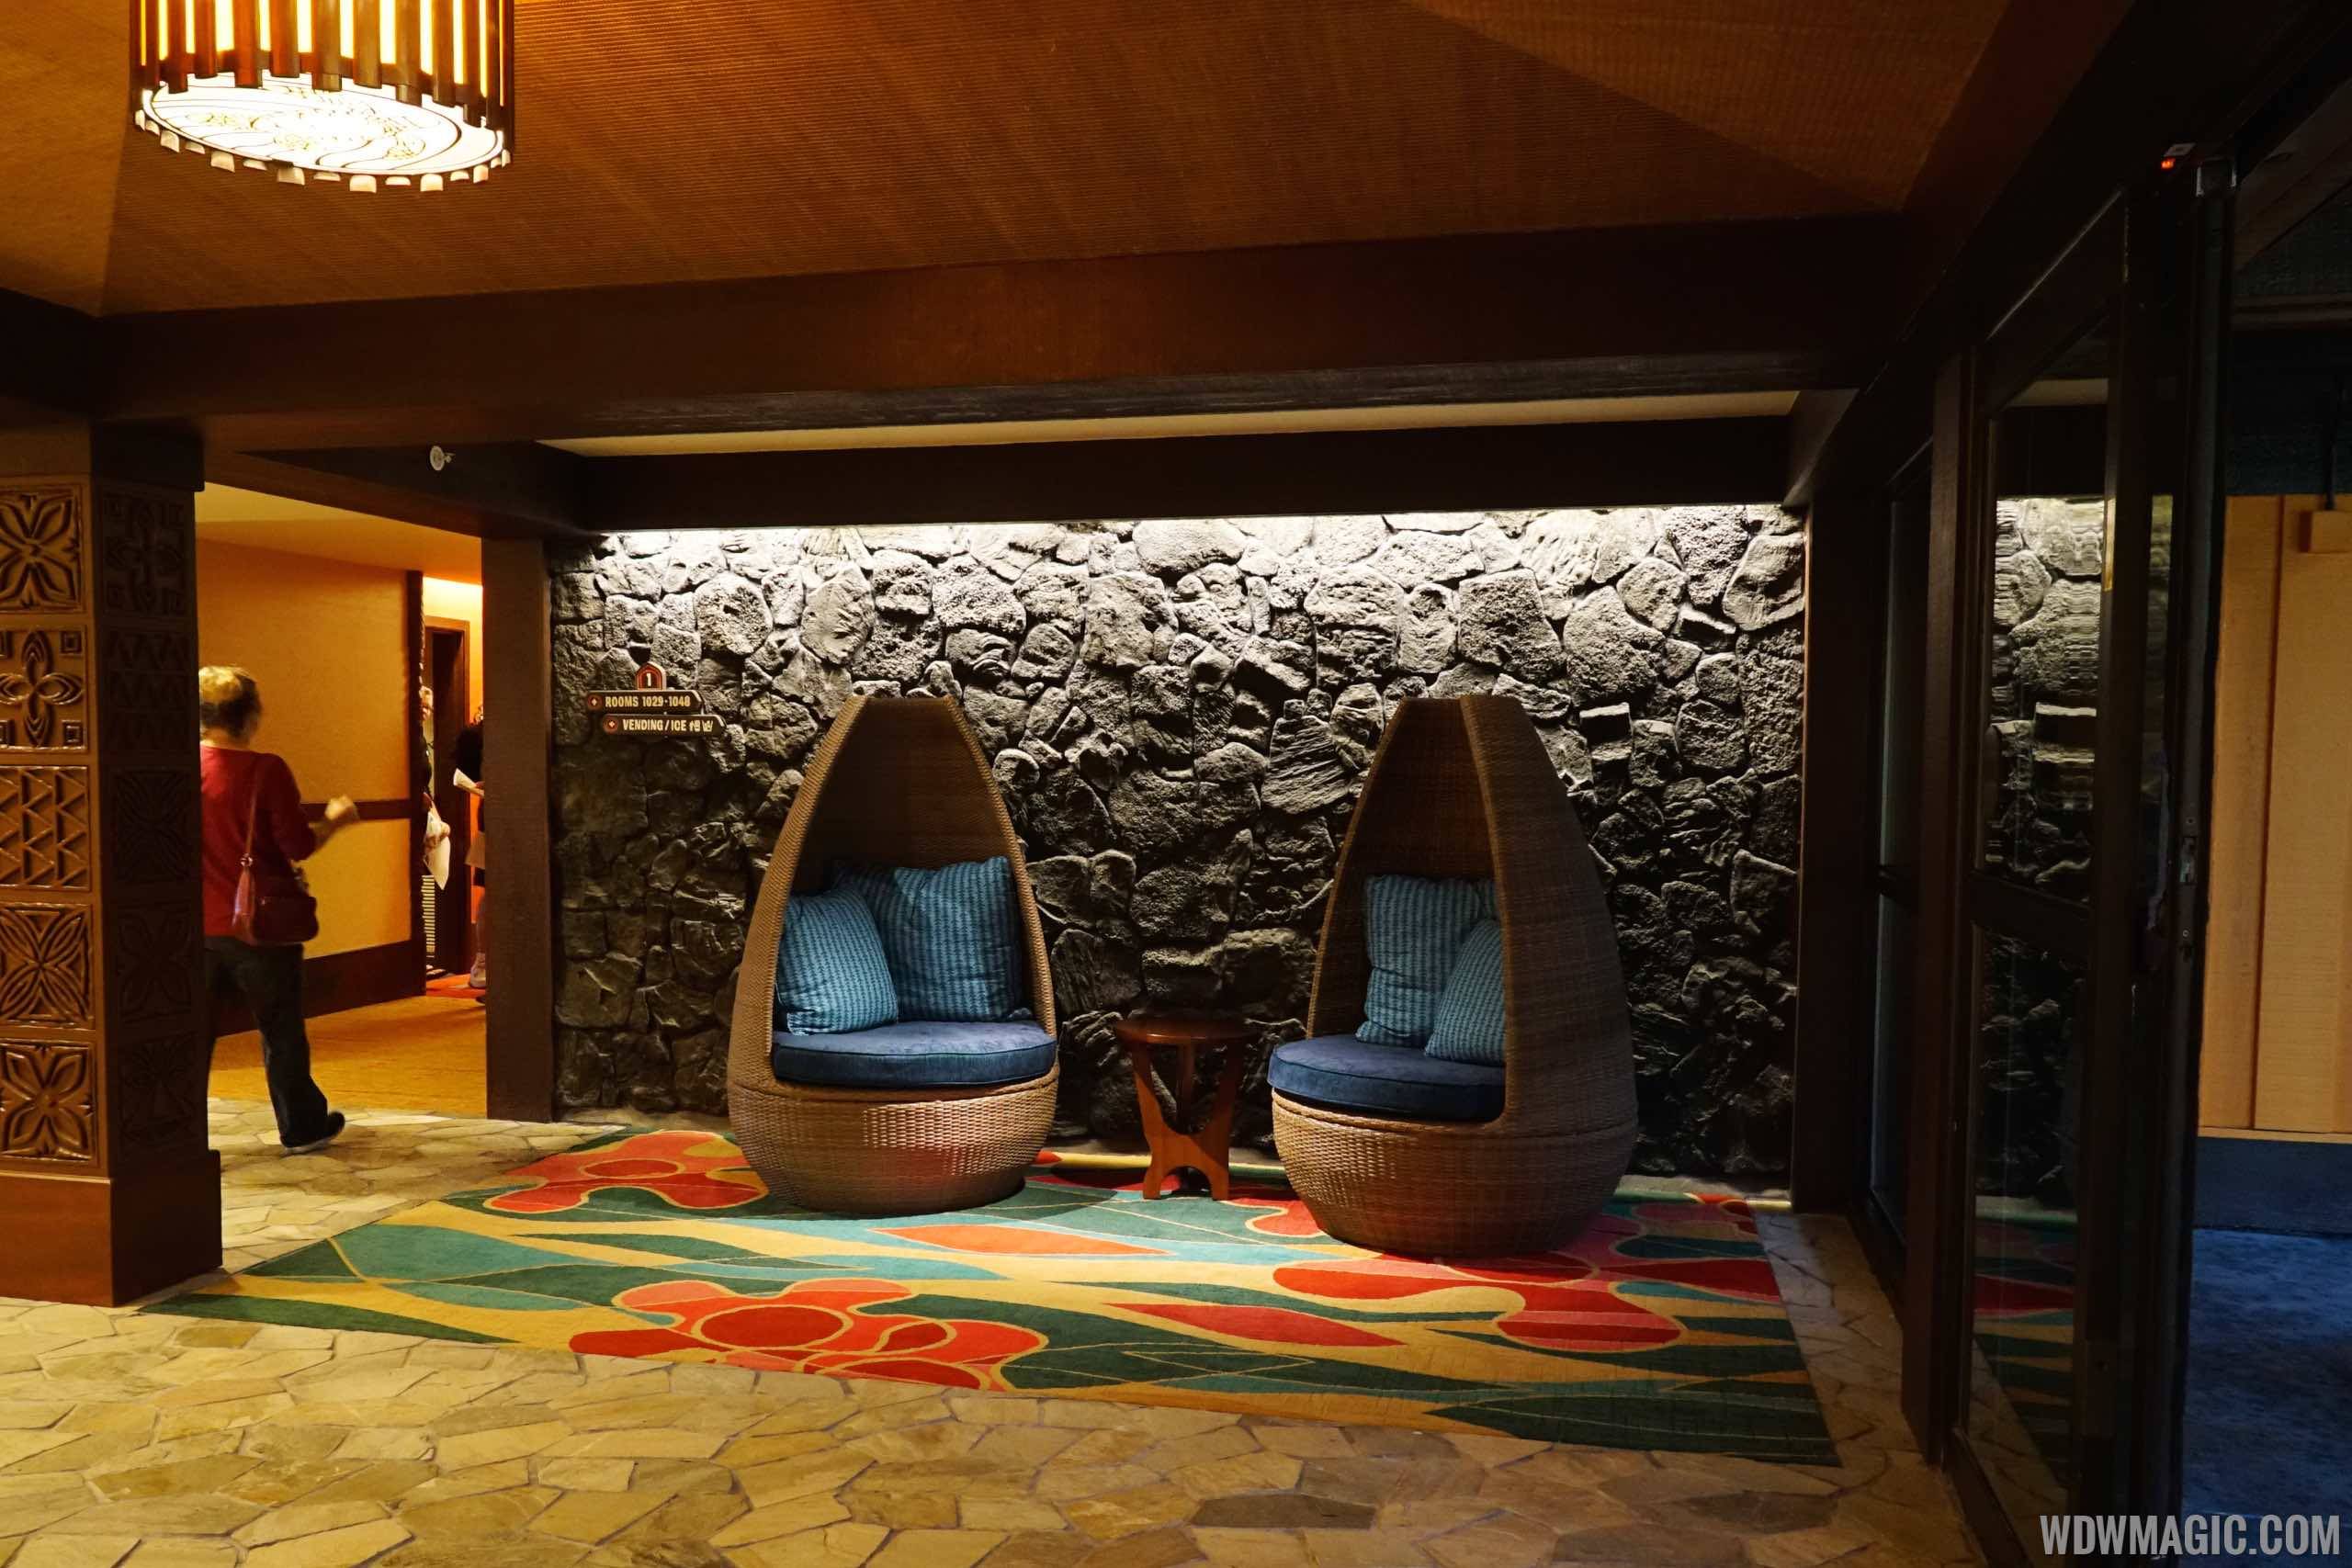 PHOTOS - Tour through a completed Deluxe Studio room in the Pago Pago building at Disney's Polynesian Village Resort